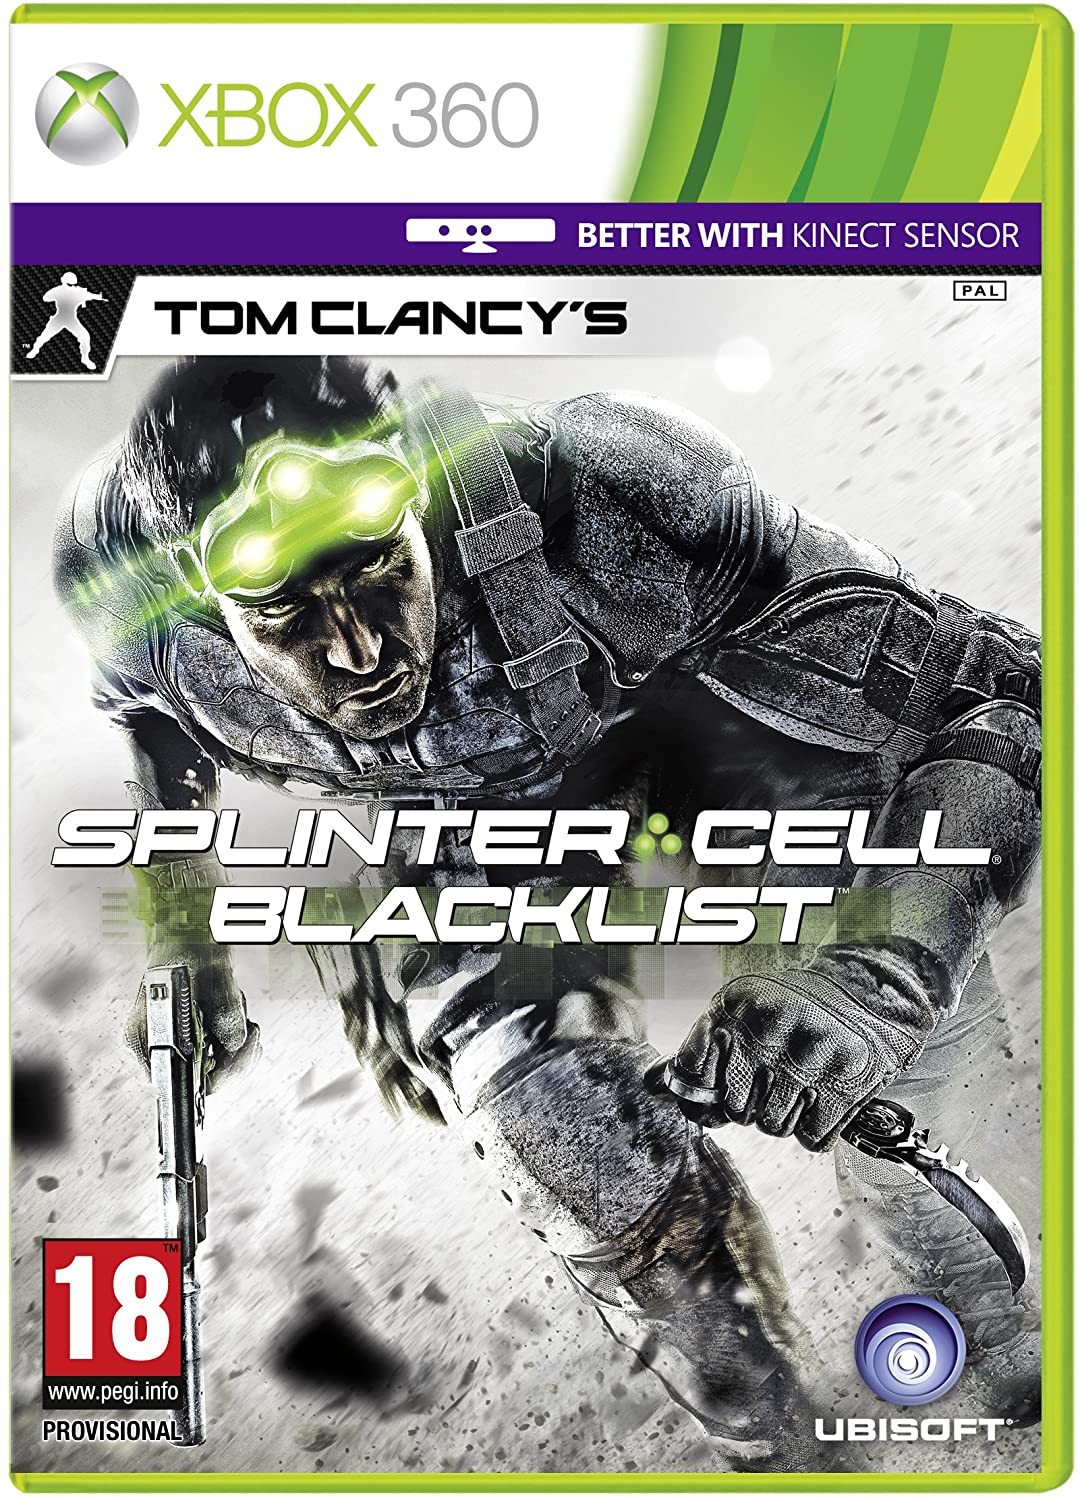 image 30 - Xbox 360 Games Download - SPLINTER CELL